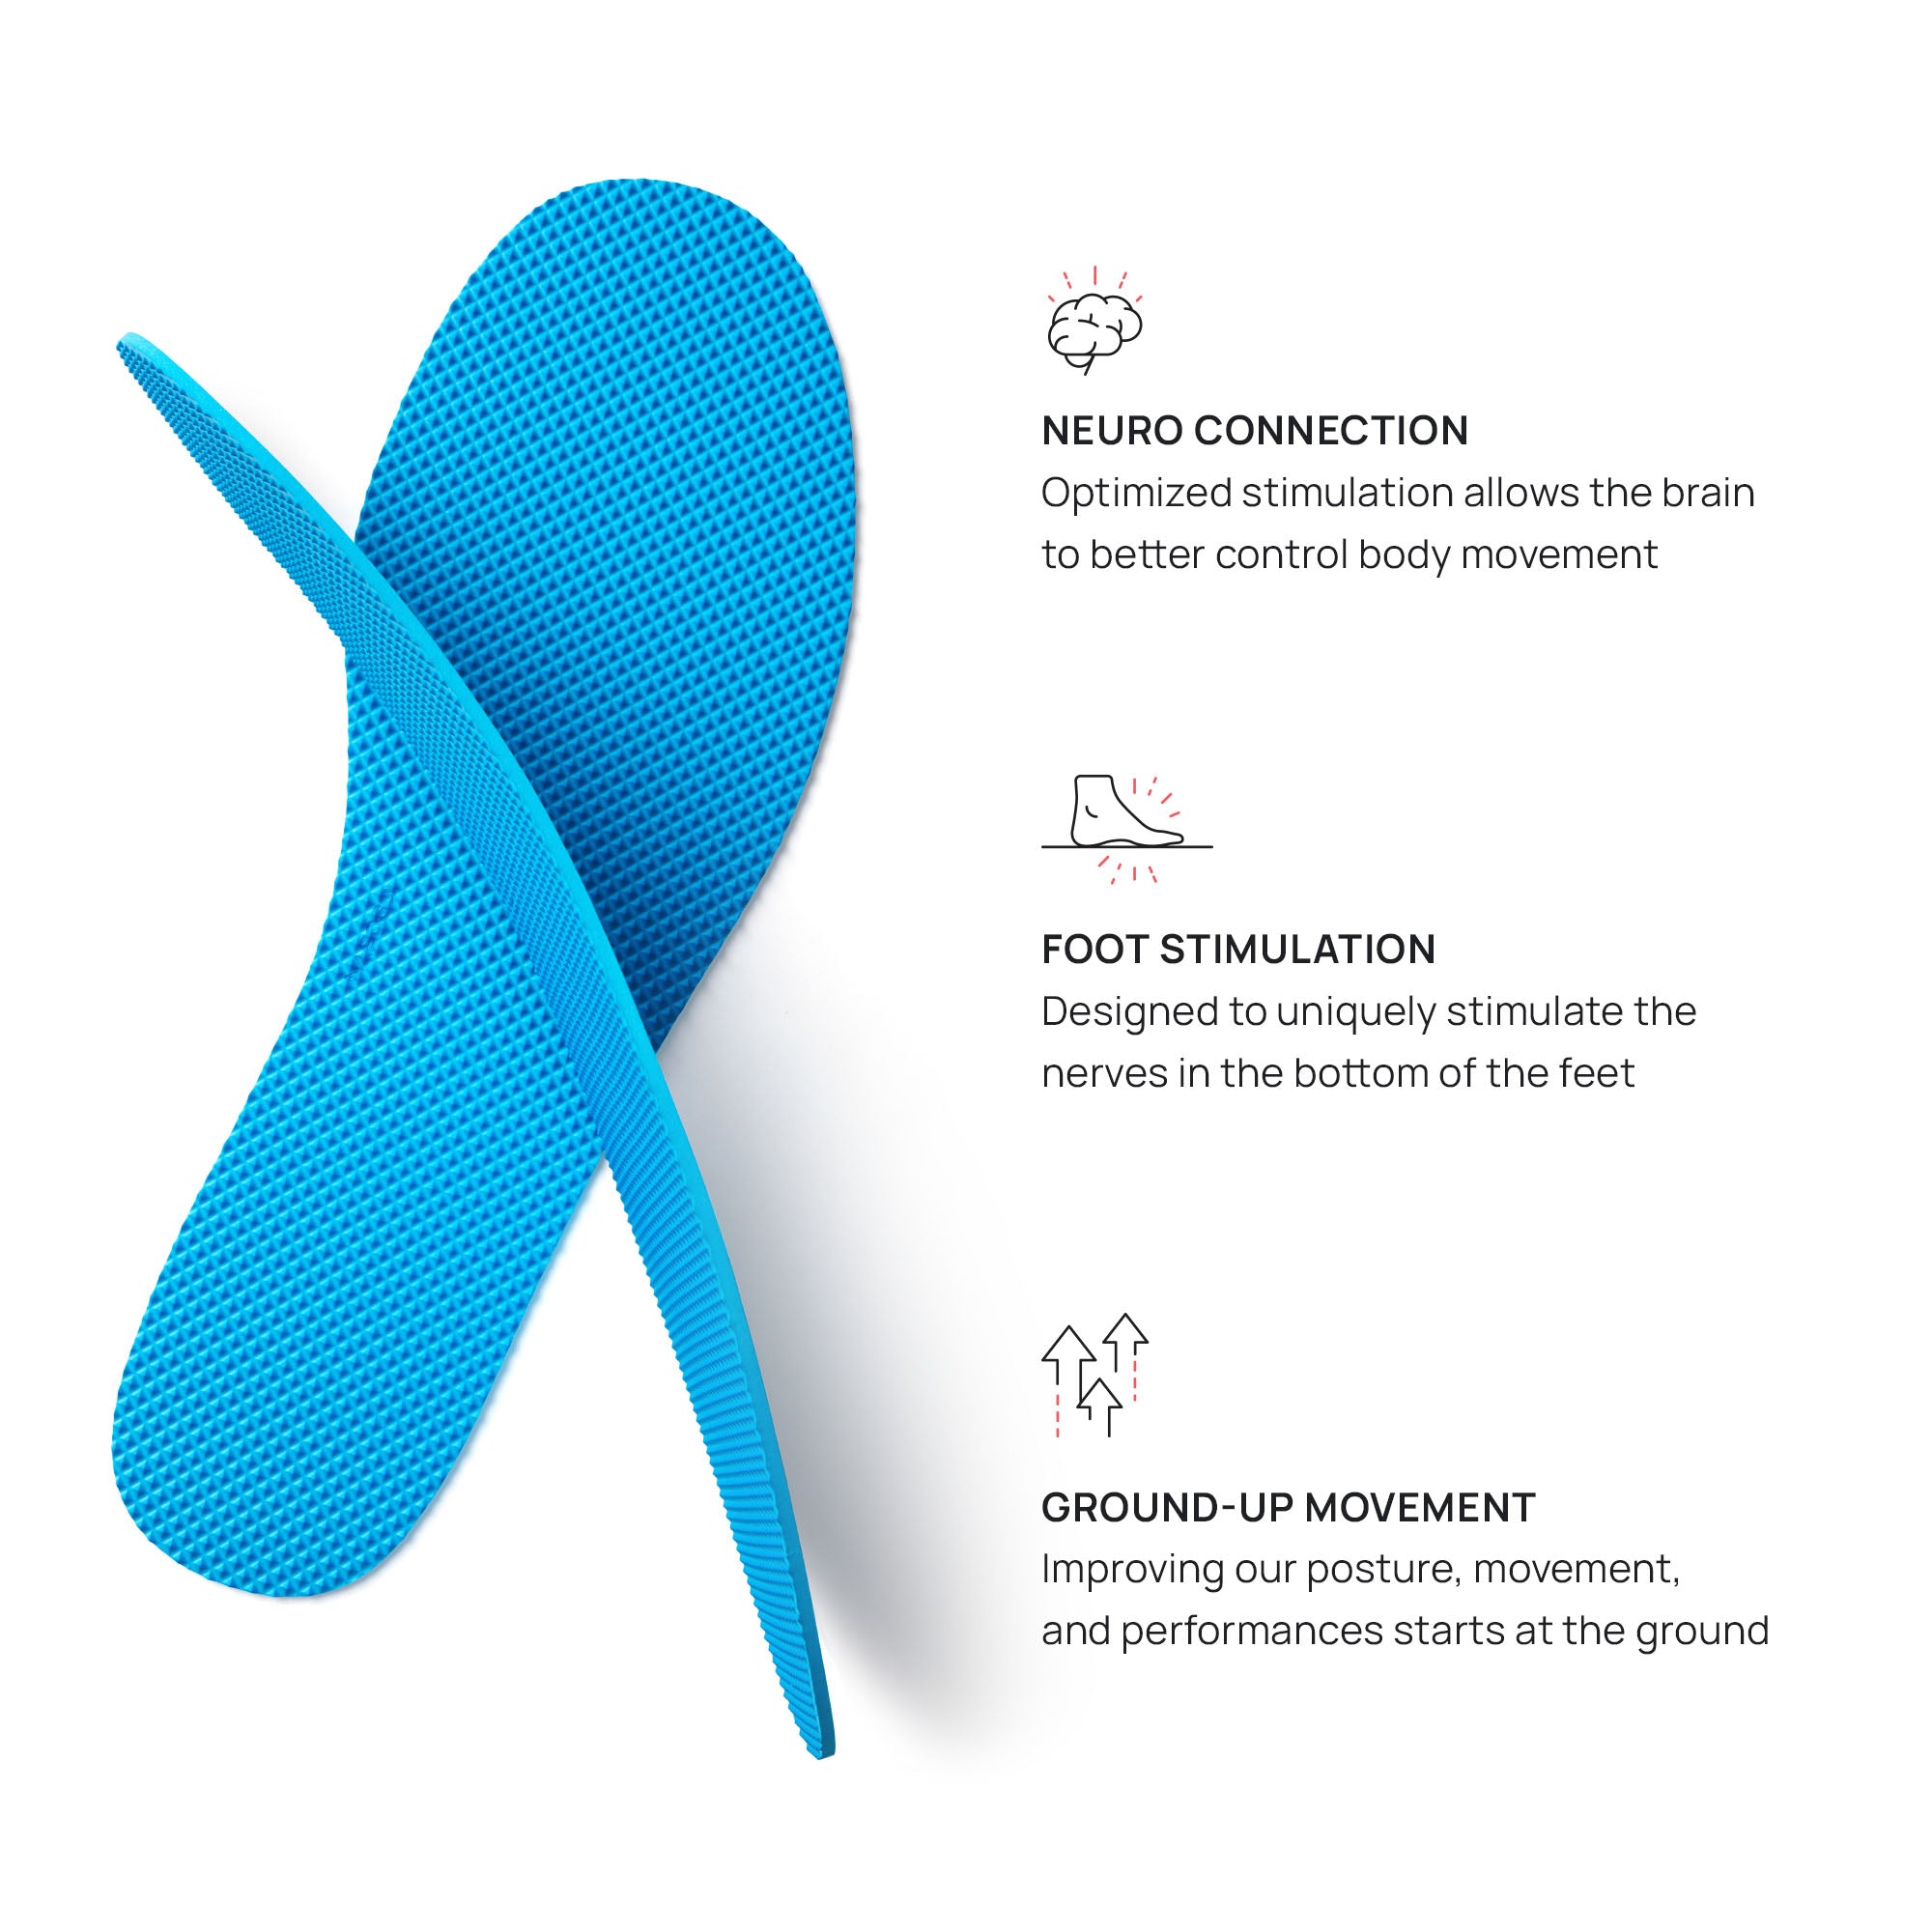 Two blue Naboso Activation Insoles along with 3 icons demonstrating the different ways the Activation Insole is stimulating: 1. Neuro Connection allowing the brain to better control body movement 2. Stimulating the nerves on the bottom of the feet 3. Posture improvement beginning from the ground up